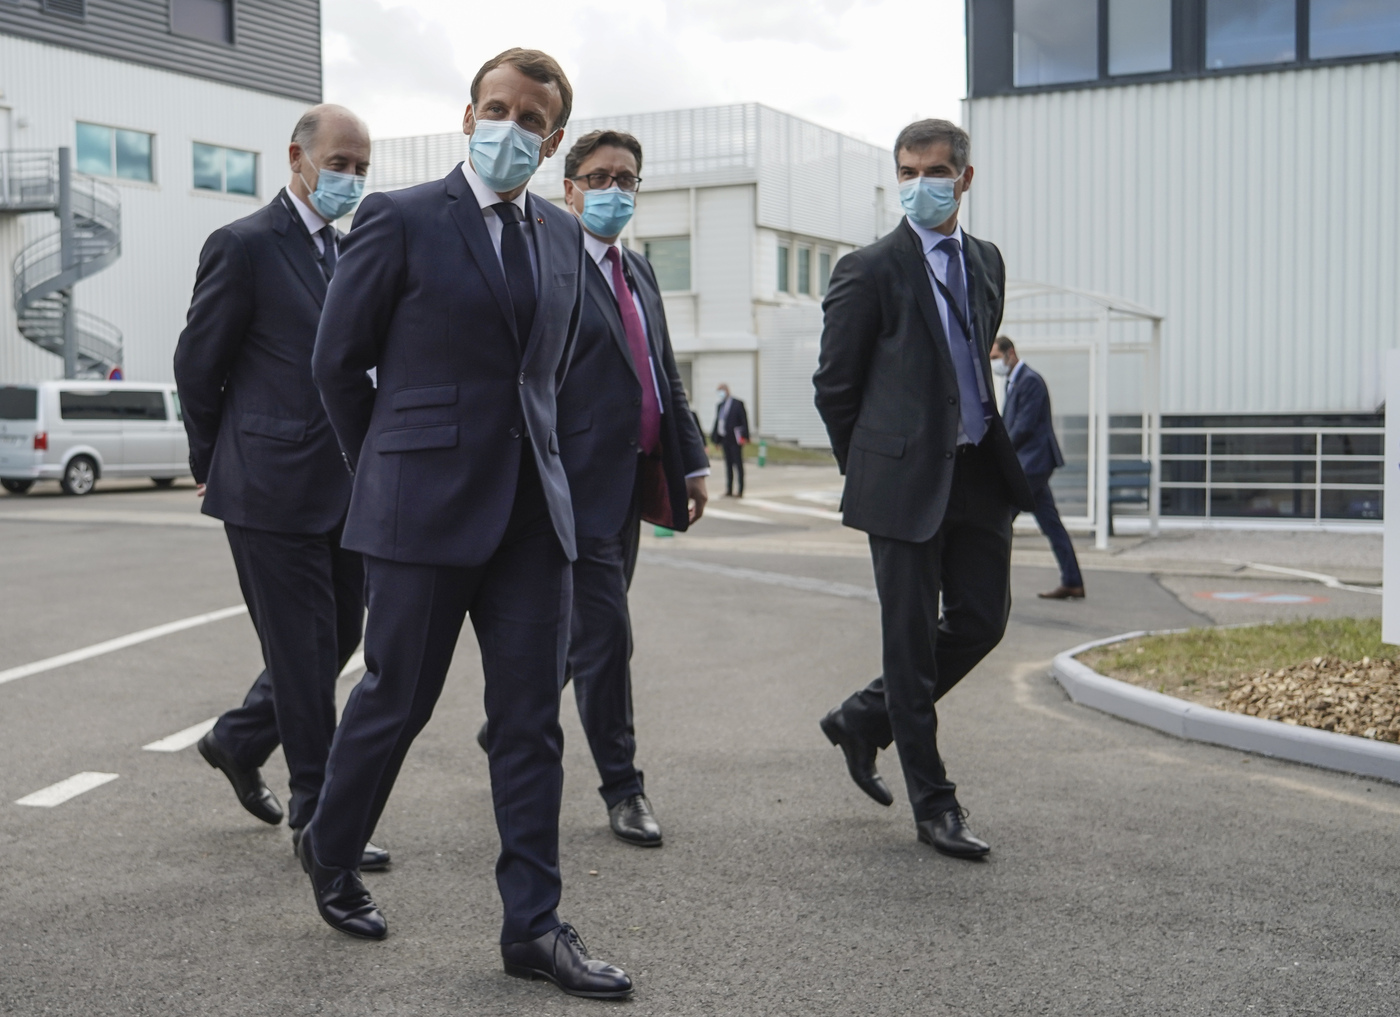 From left to right, Board Director of Sanofi Serge Weinberg, French President Emmanuel Macron, CEO of Sanofi Paul Hudson, and President of Sanofi France Olivier Bogillot arrive at the French drugmaker's vaccine unit Sanofi Pasteur plant in Marcy-l'Etoile, near Lyon, central France, Tuesday, June 16, 2020.The visit comes after rival pharmaceutical company AstraZeneca this weekend announced a deal to supply 400 million vaccine doses to EU countries, including France. (AP Photo/Laurent Cipriani, Pool)